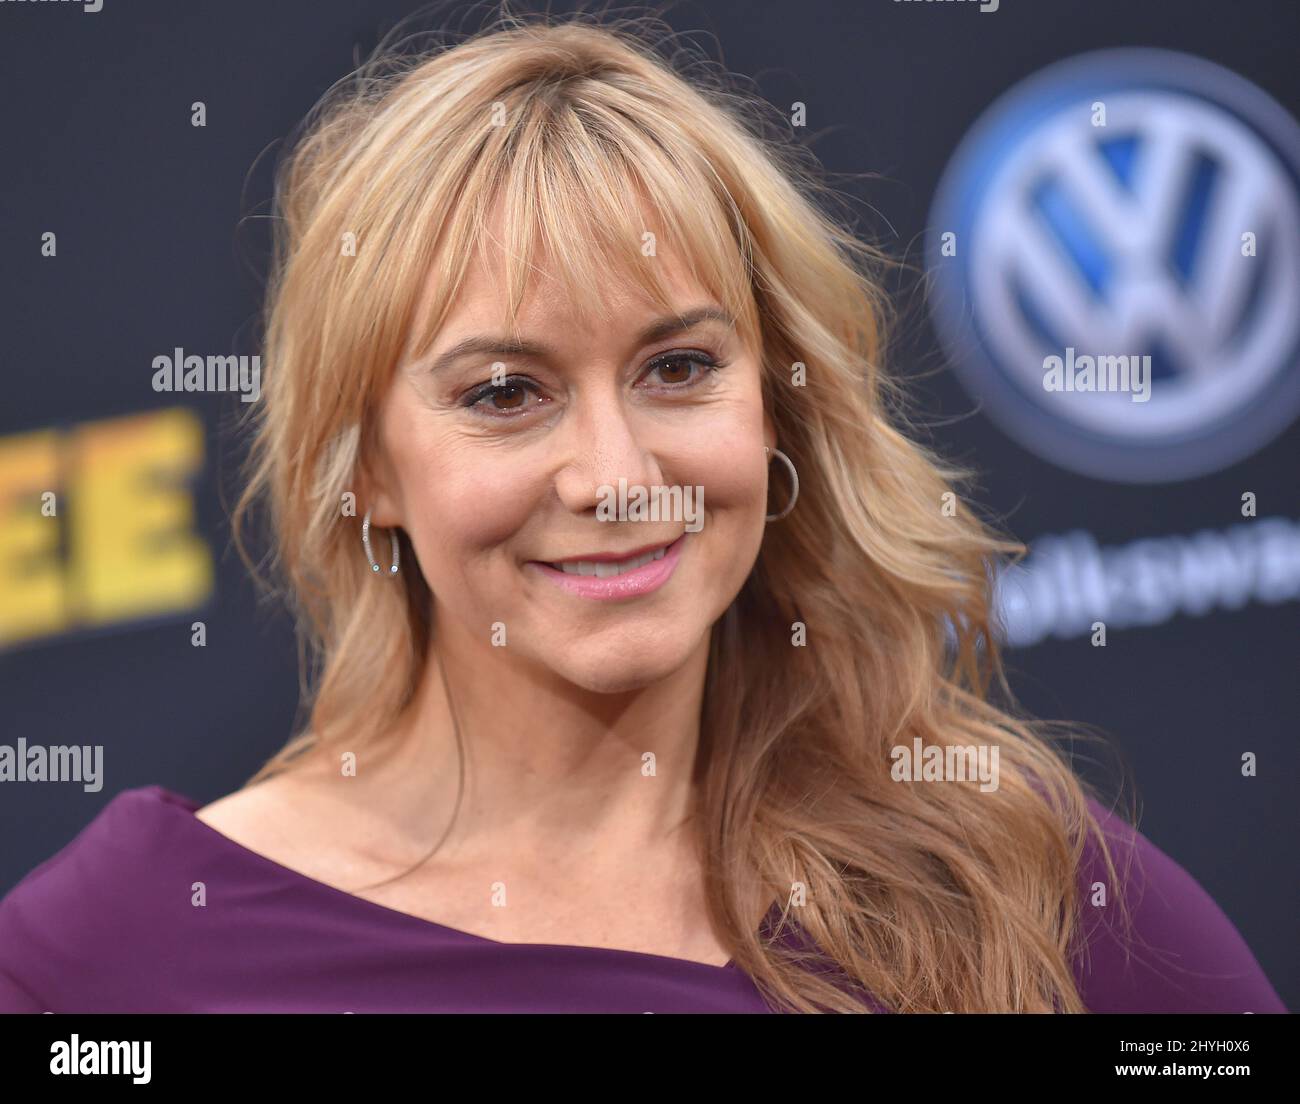 Megyn Price arriving for the Bumblebee World Premiere held at the TCL Chinese Theatre on December 9, 2018 in Hollywood, Los Angeles Stock Photo